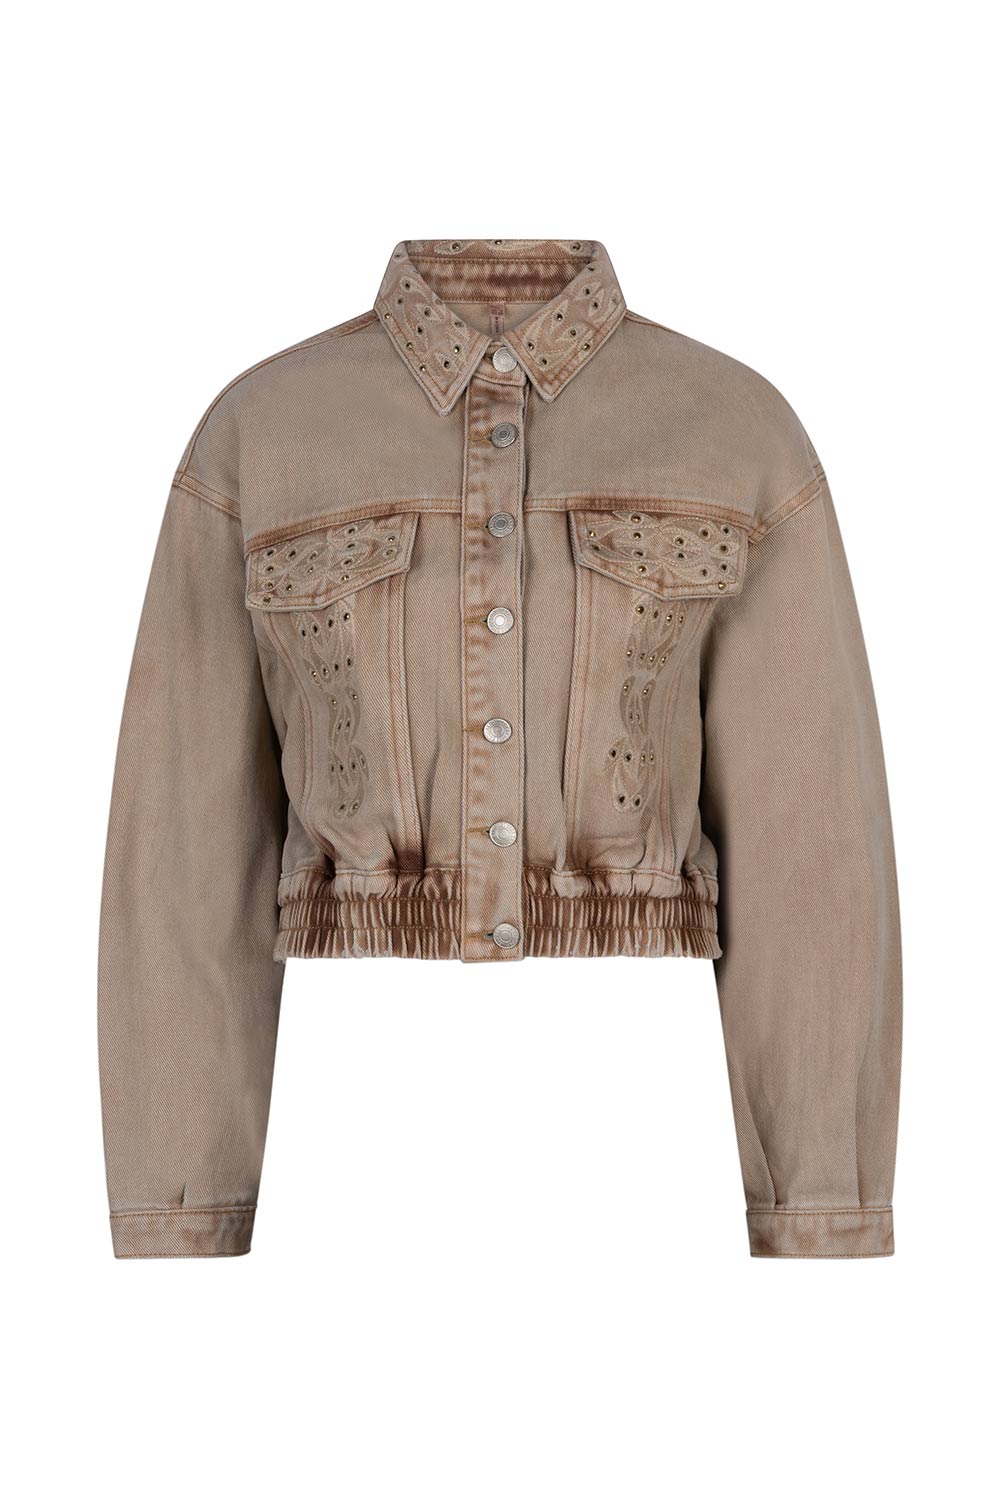 Esqualo (SP2412010) Women's Long Sleeve Cropped Dark Sand Jean Jacket With Embroidery and Rhinestone embellishment